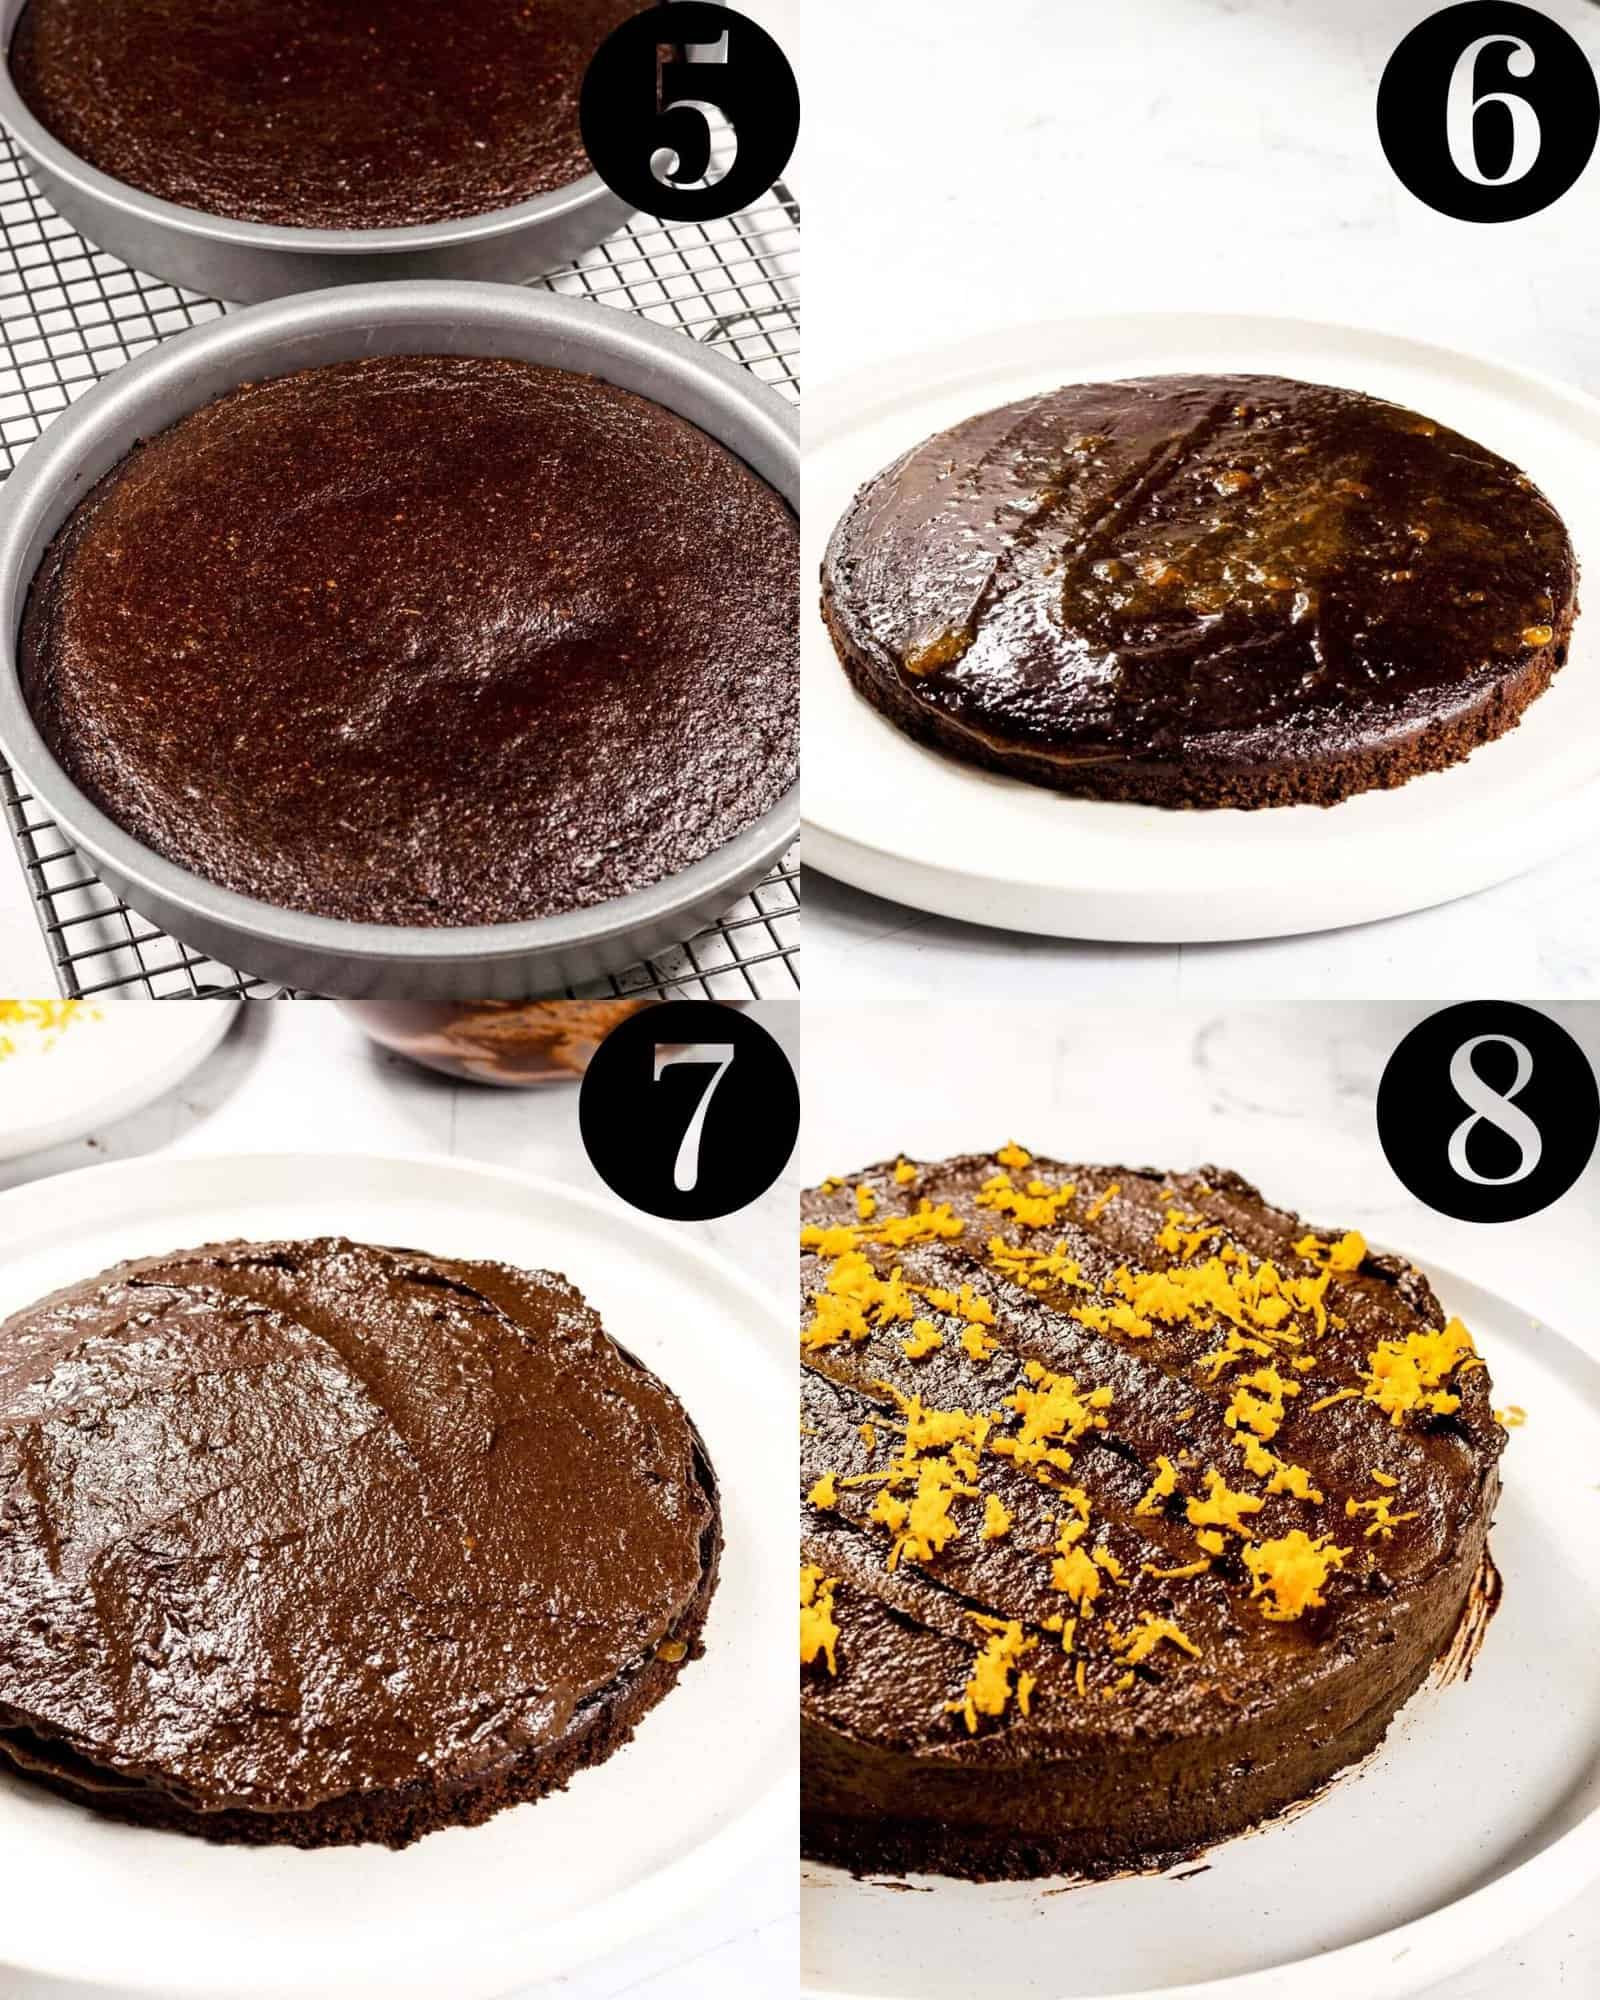 Step by step process of making an easy chocolate fudge cake.